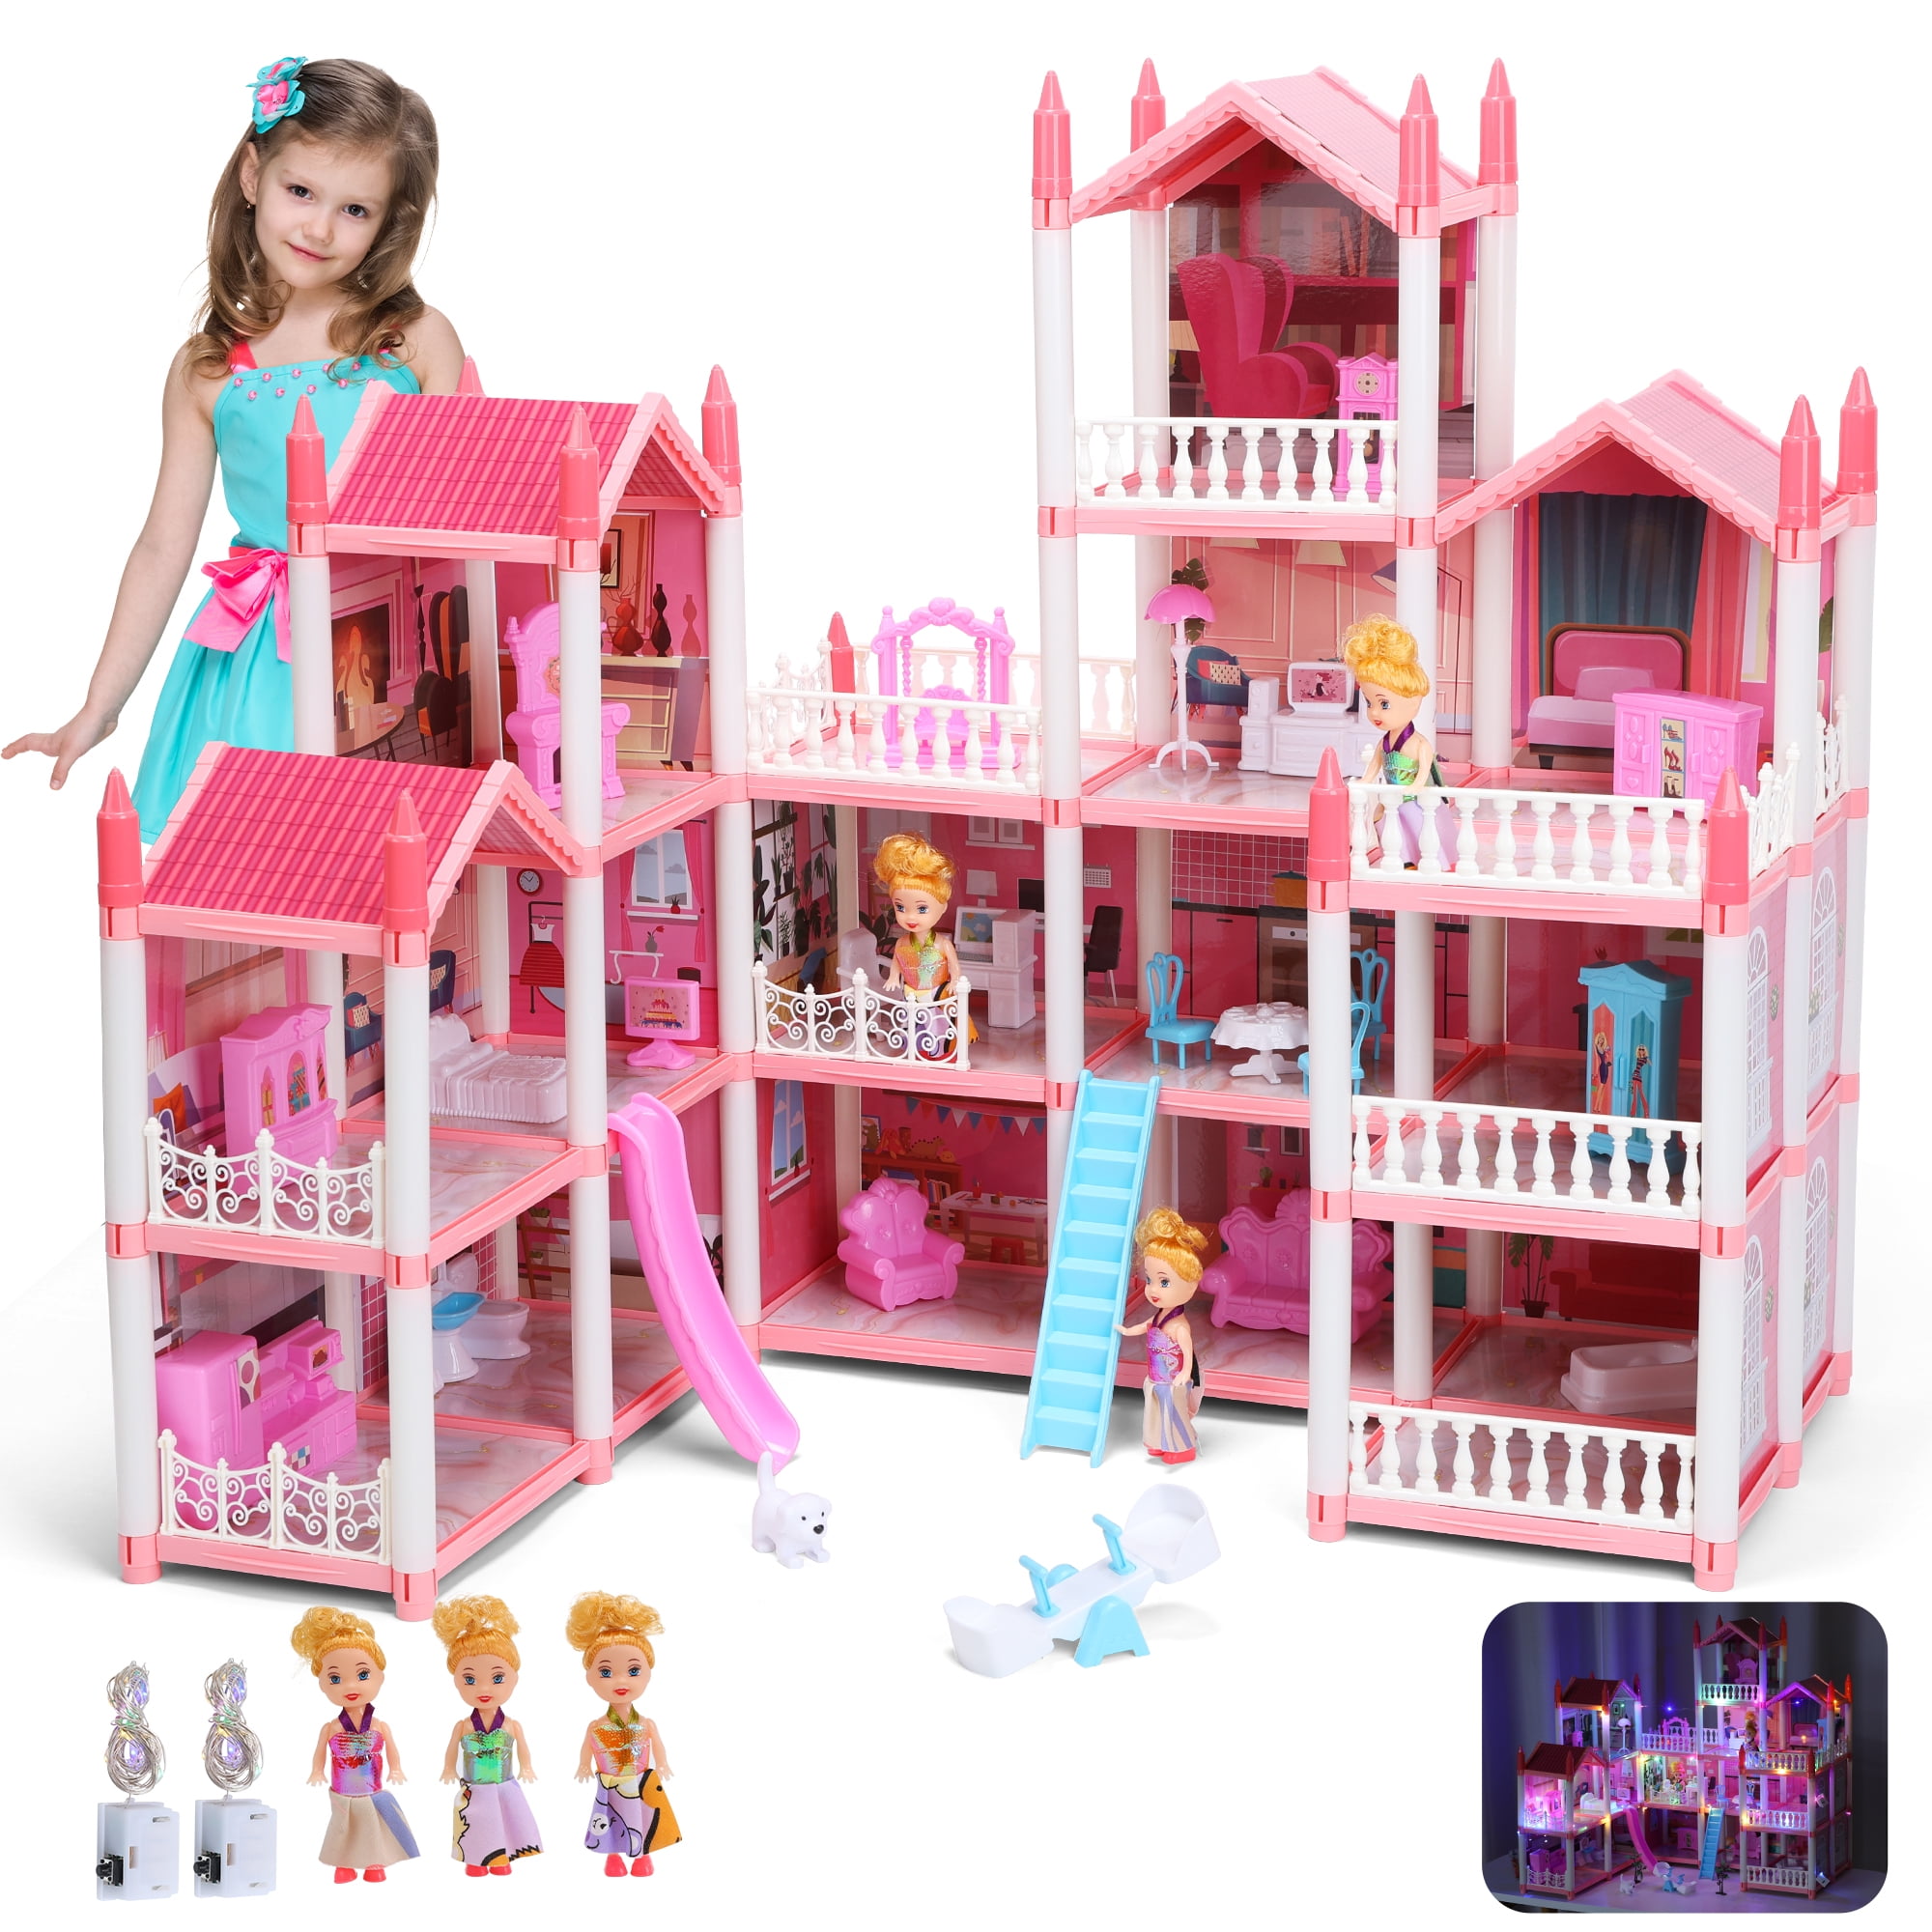 Rolife DIY Miniature Dollhouse Kit Craft Kit for Adults to Build Tiny  Things Gift for Birthday Christmas(Light Music Bar), doll house musica 